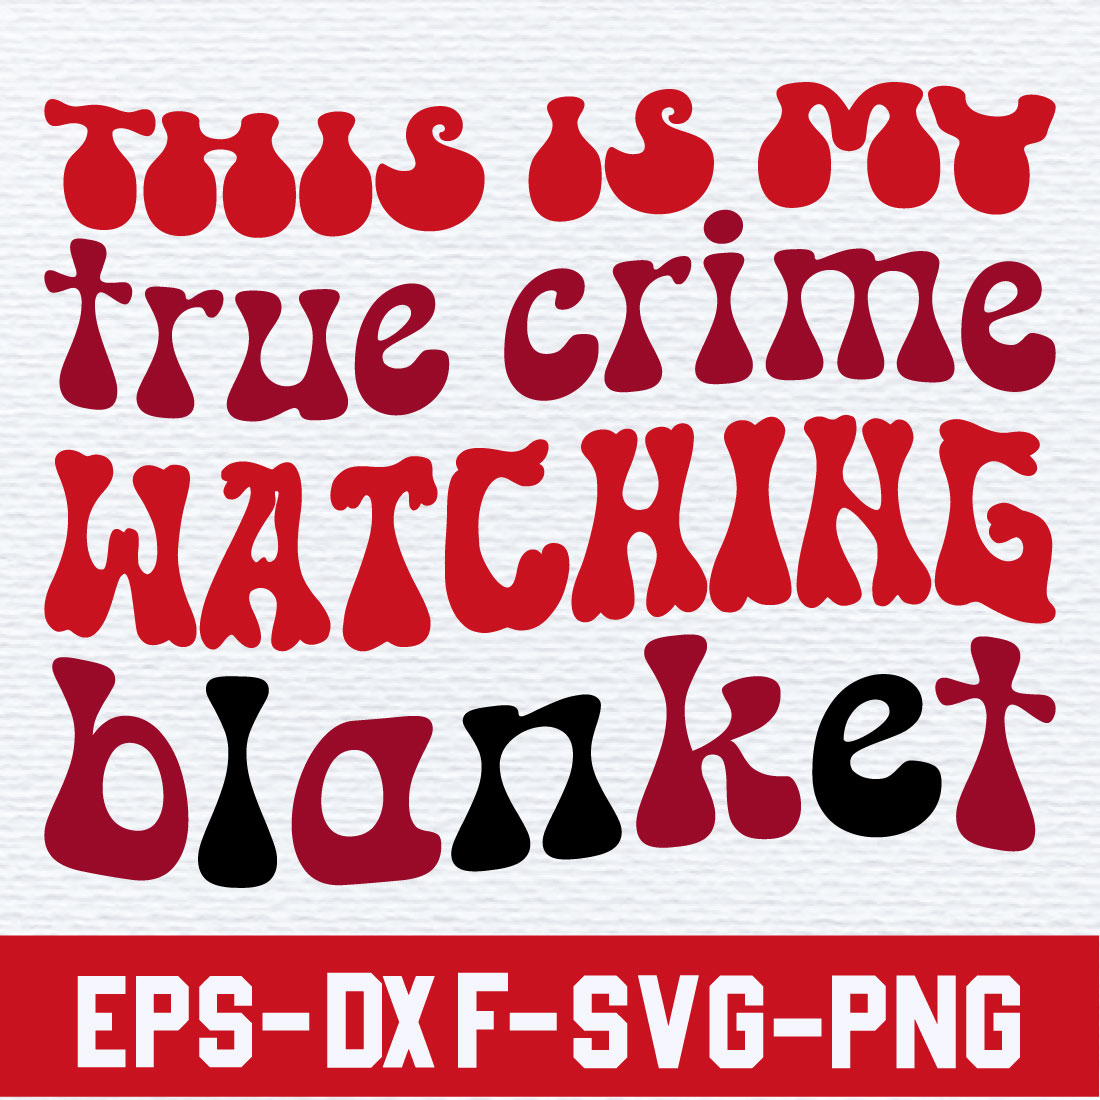 This is my true crime watching blanket preview image.